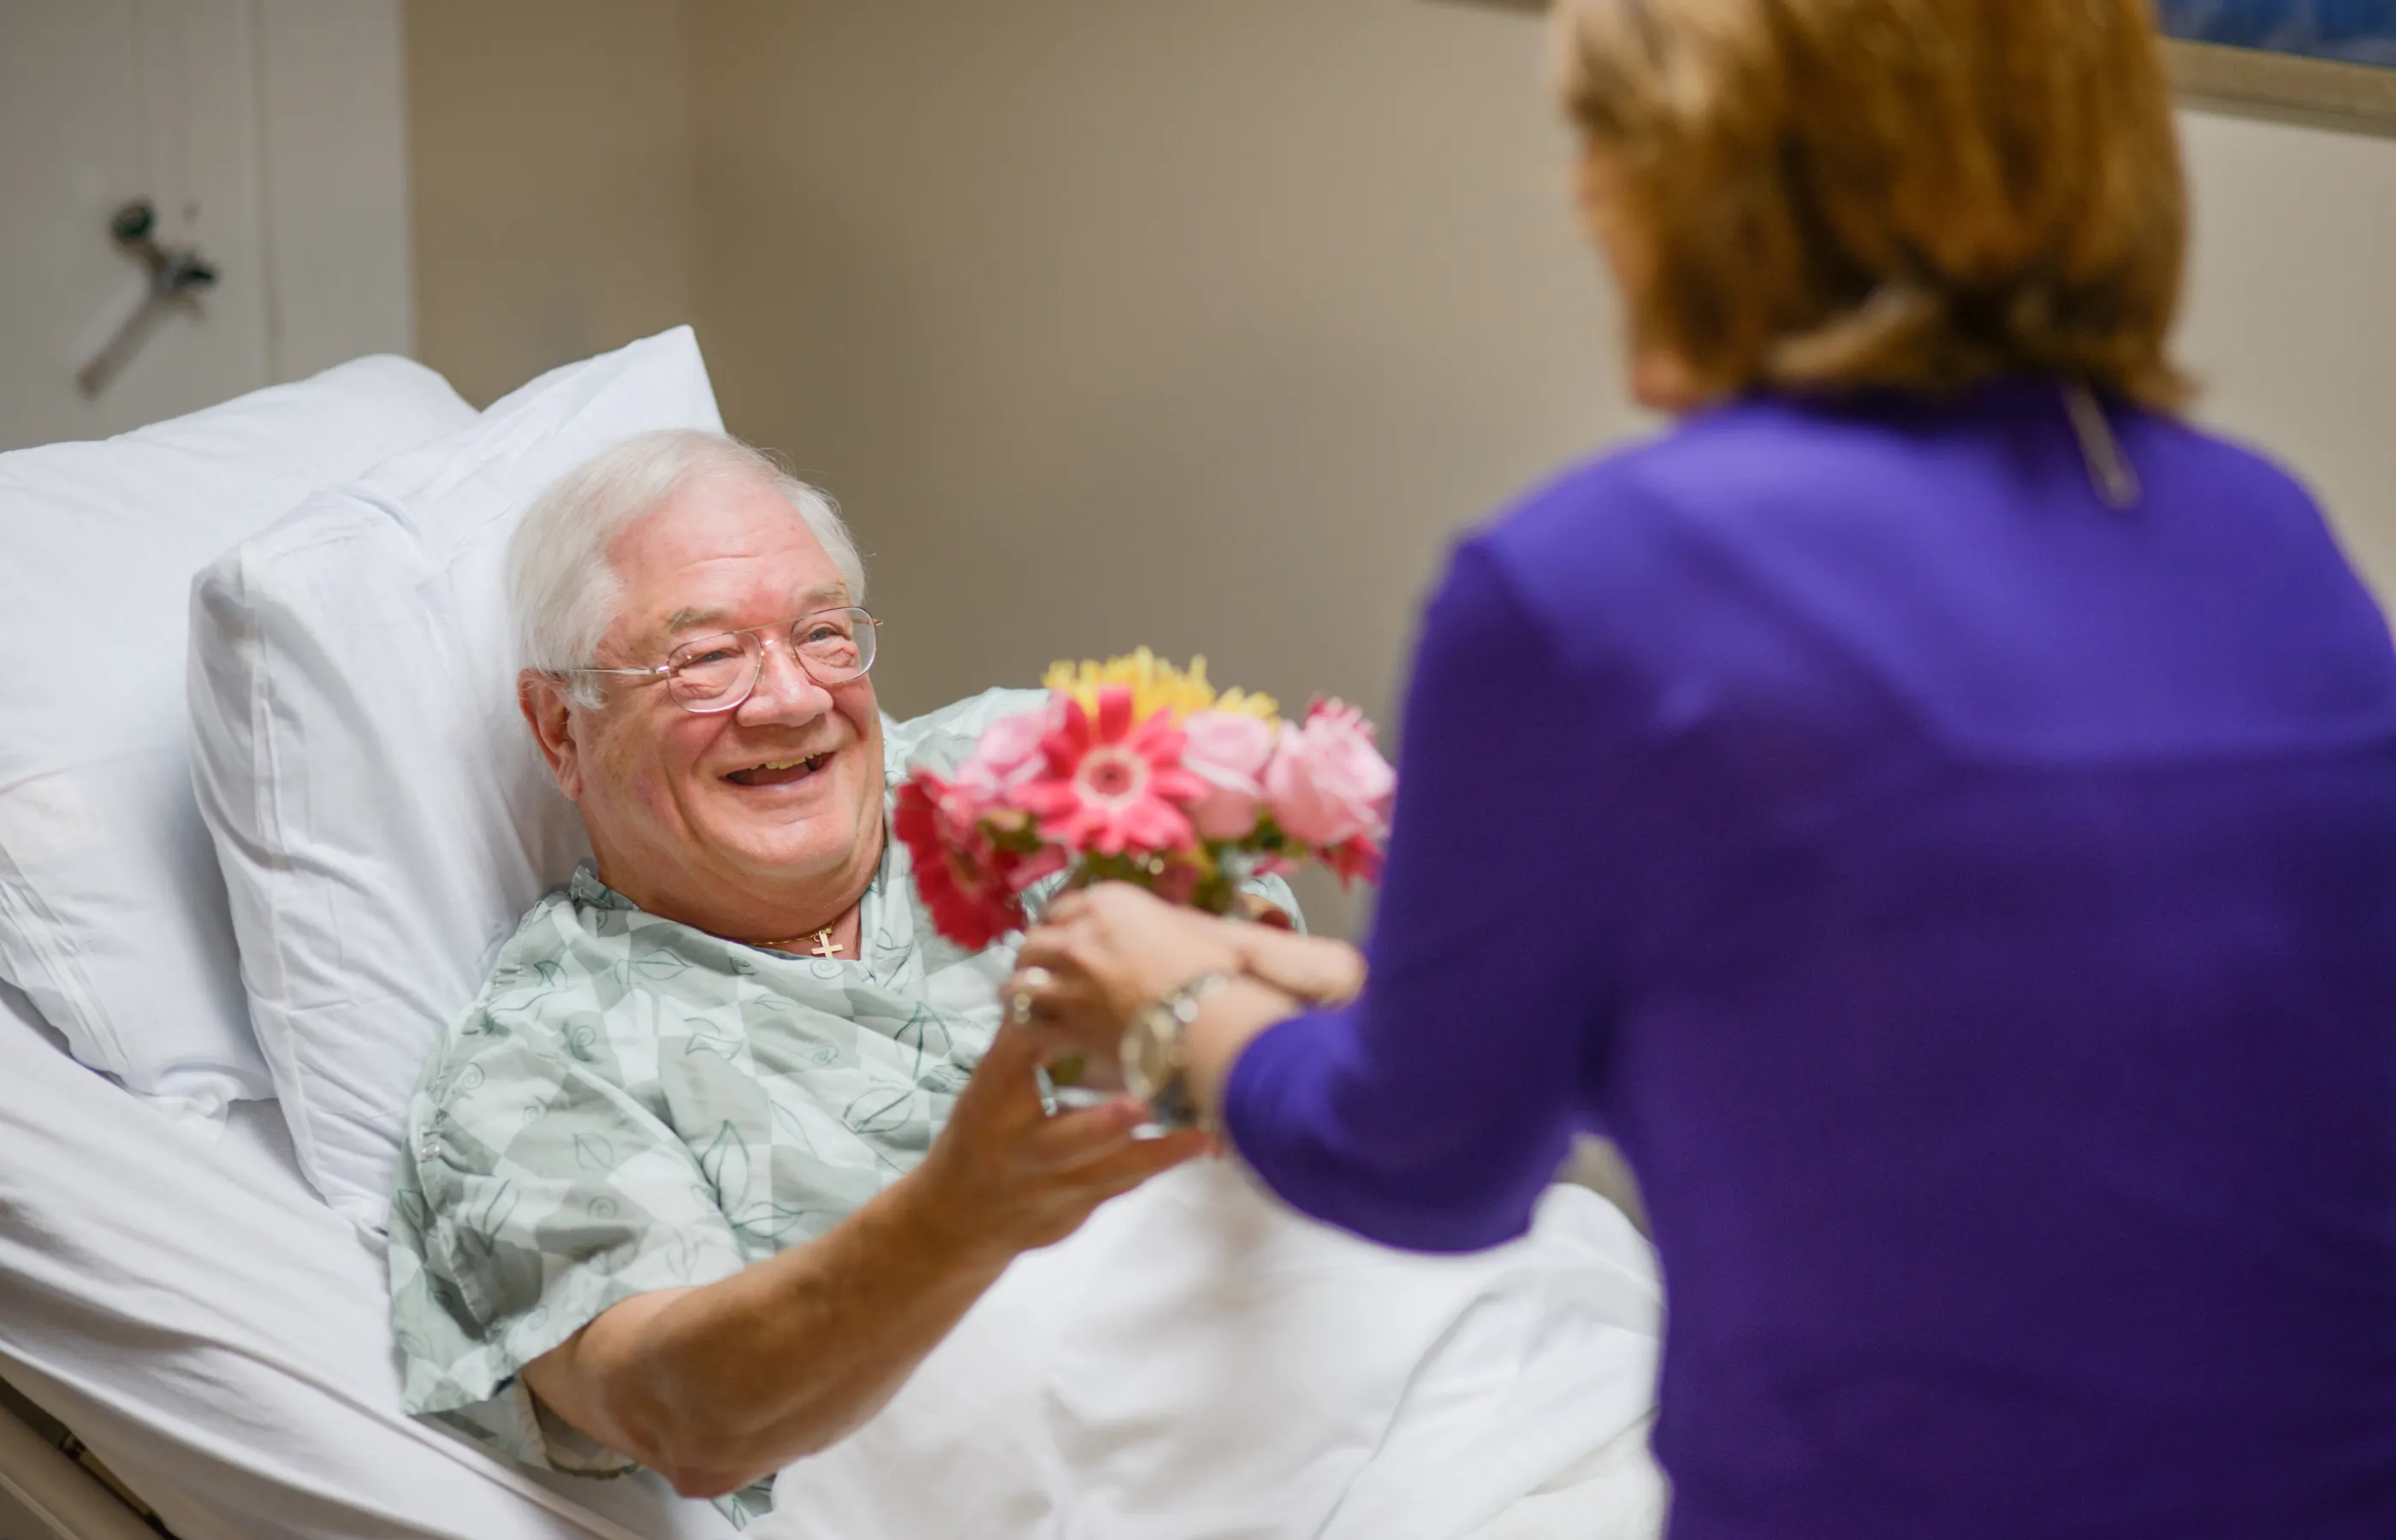 A Novant Health volunteer is delivering flowers to a patient who is lying down in a hospital bed.